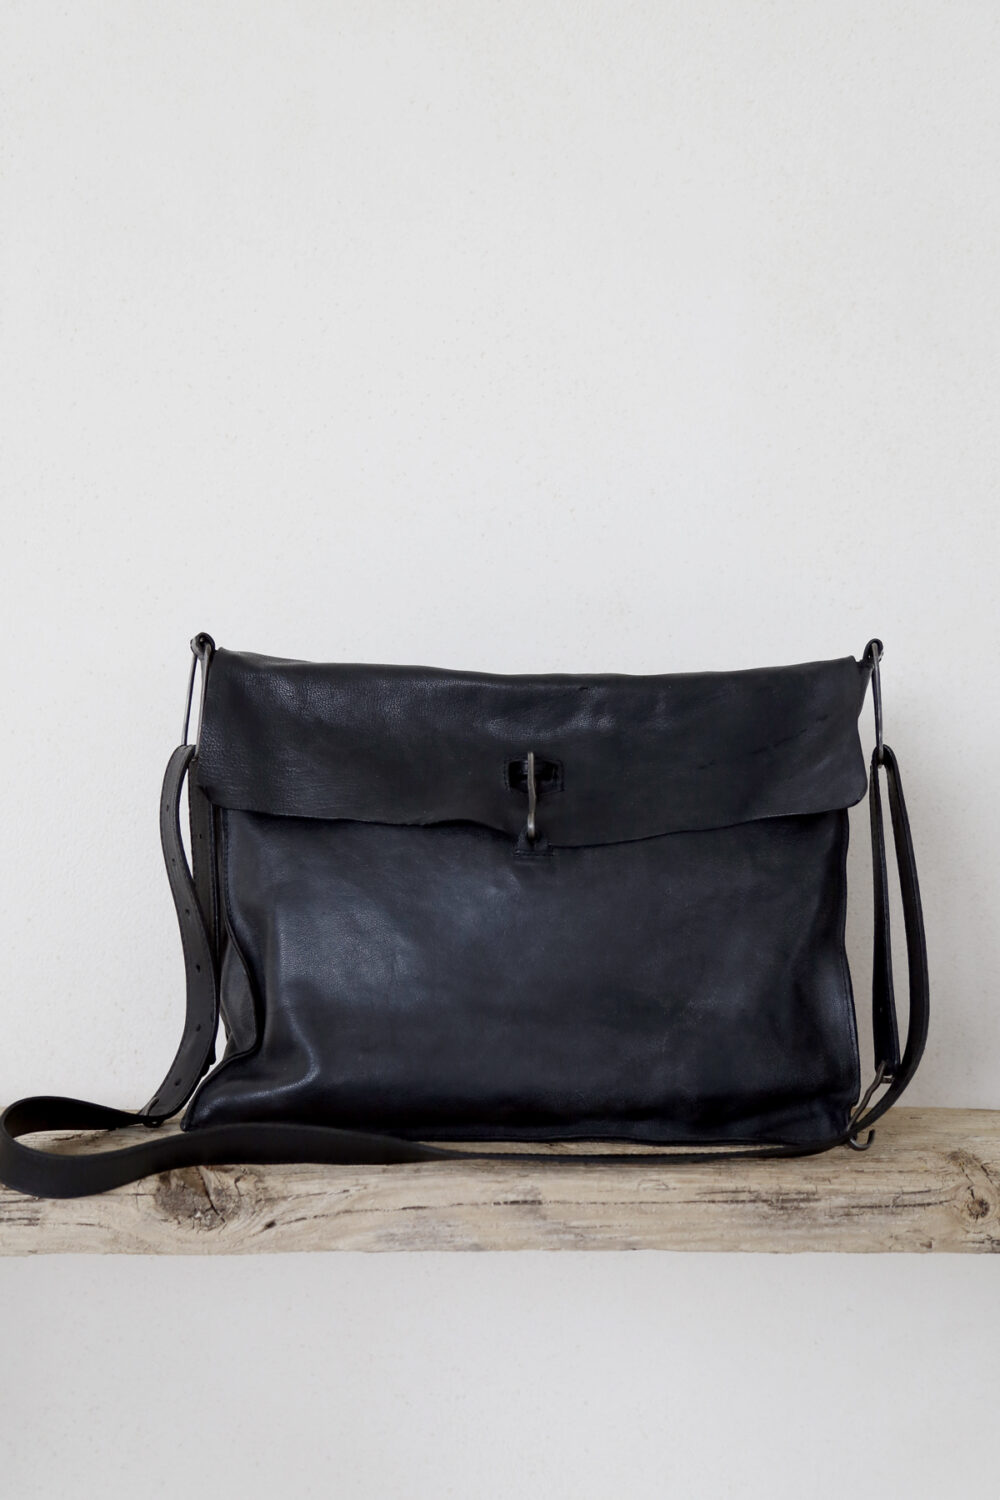 Aged Bags Archivi - Tagliovivo | Artisanal Leather Bags